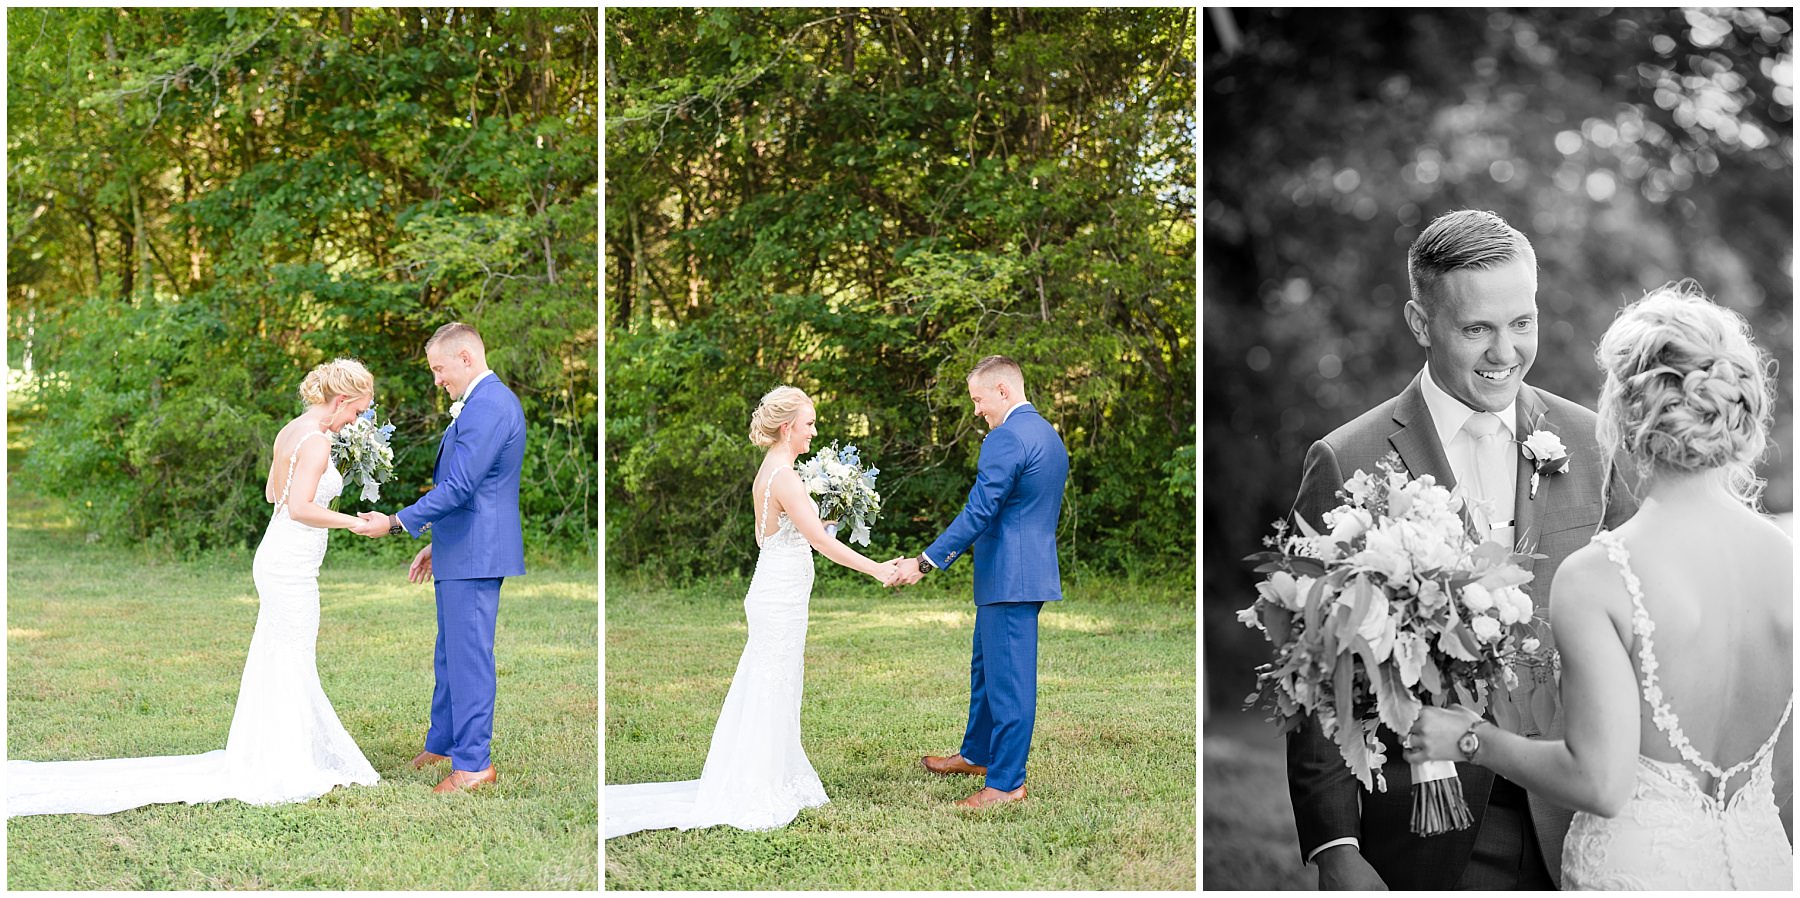 Nashville bride and groom's first look during their wedding day at Tucker's Gap Event Center